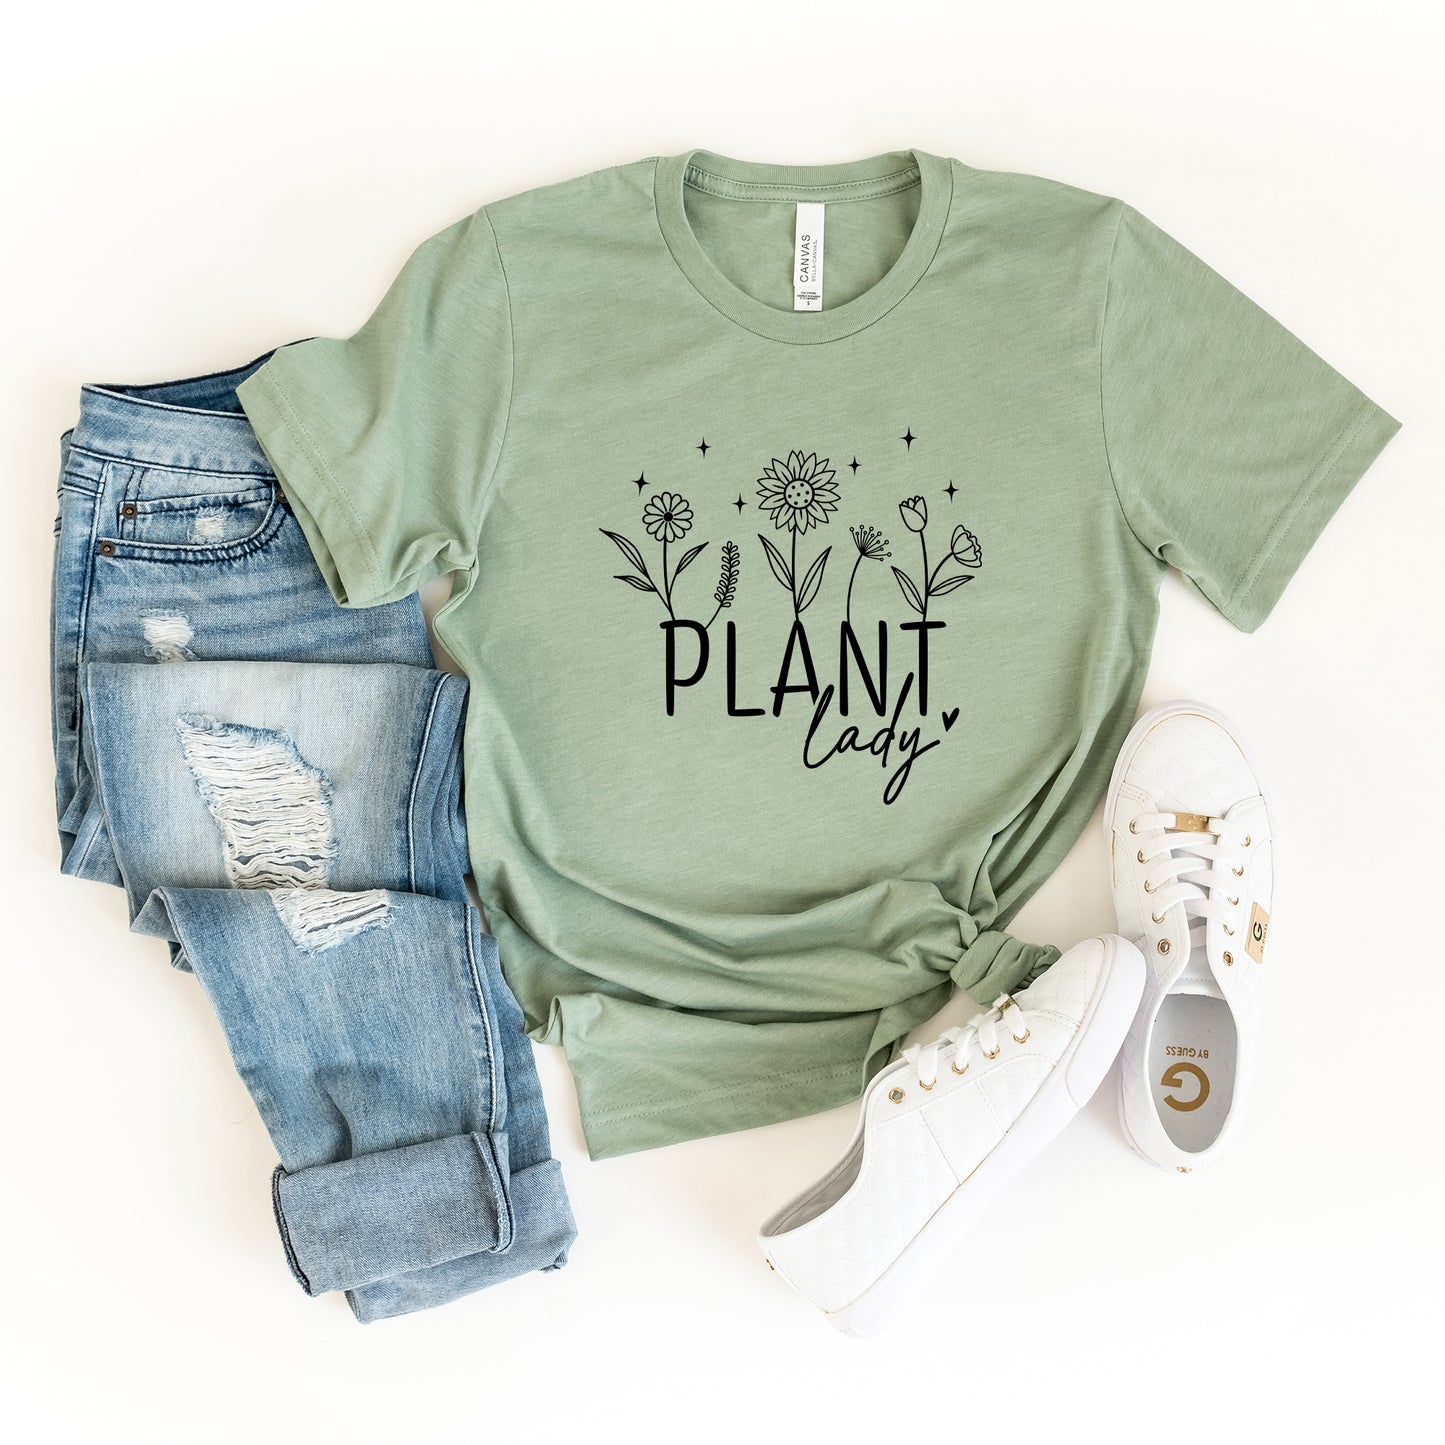 Plant Lady Flowers | Short Sleeve Graphic Tee